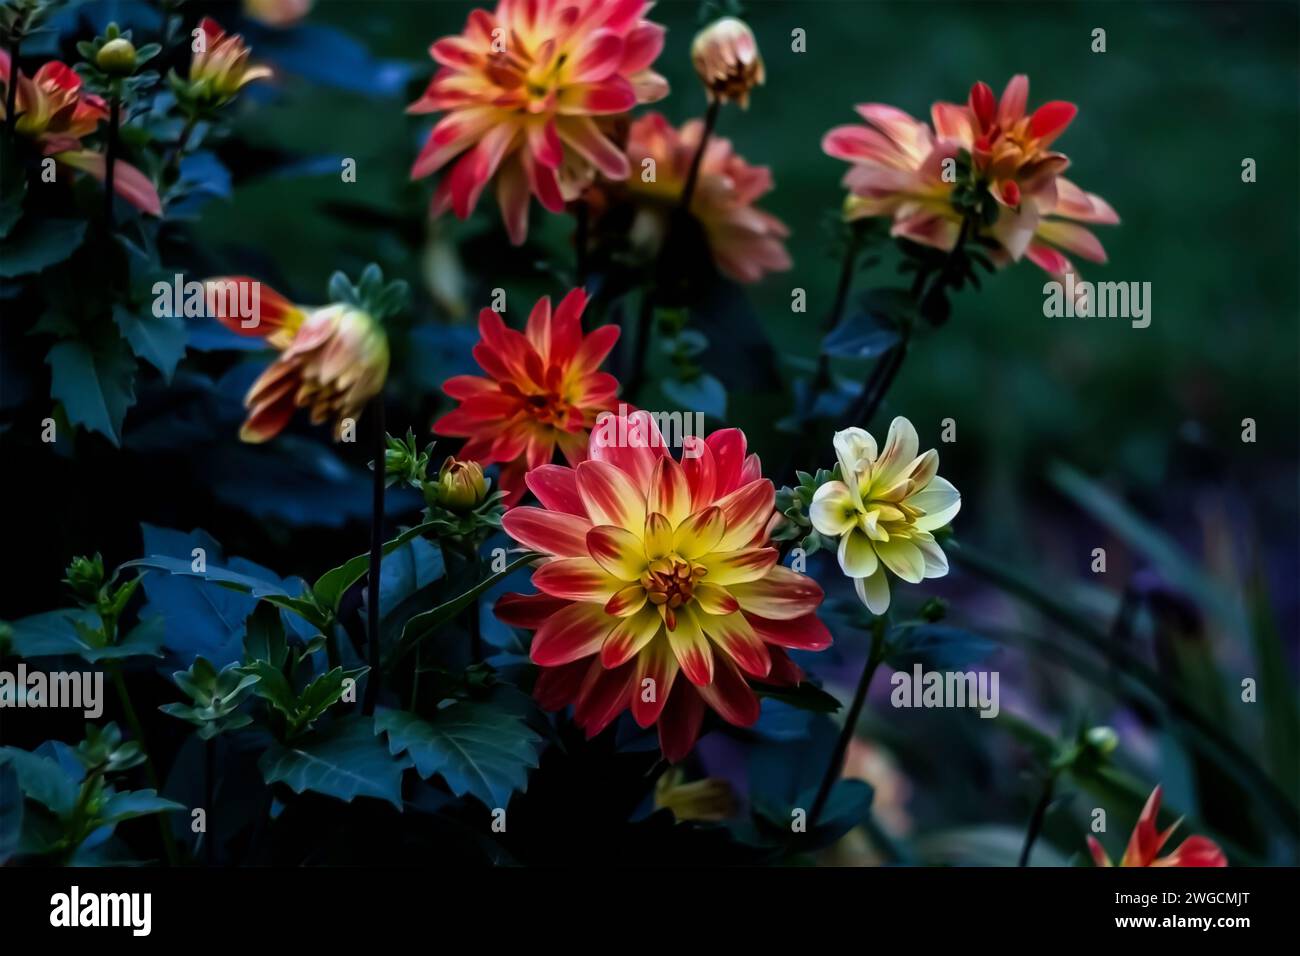 A close-up of vibrant garden flowers with lush leaves Stock Photo